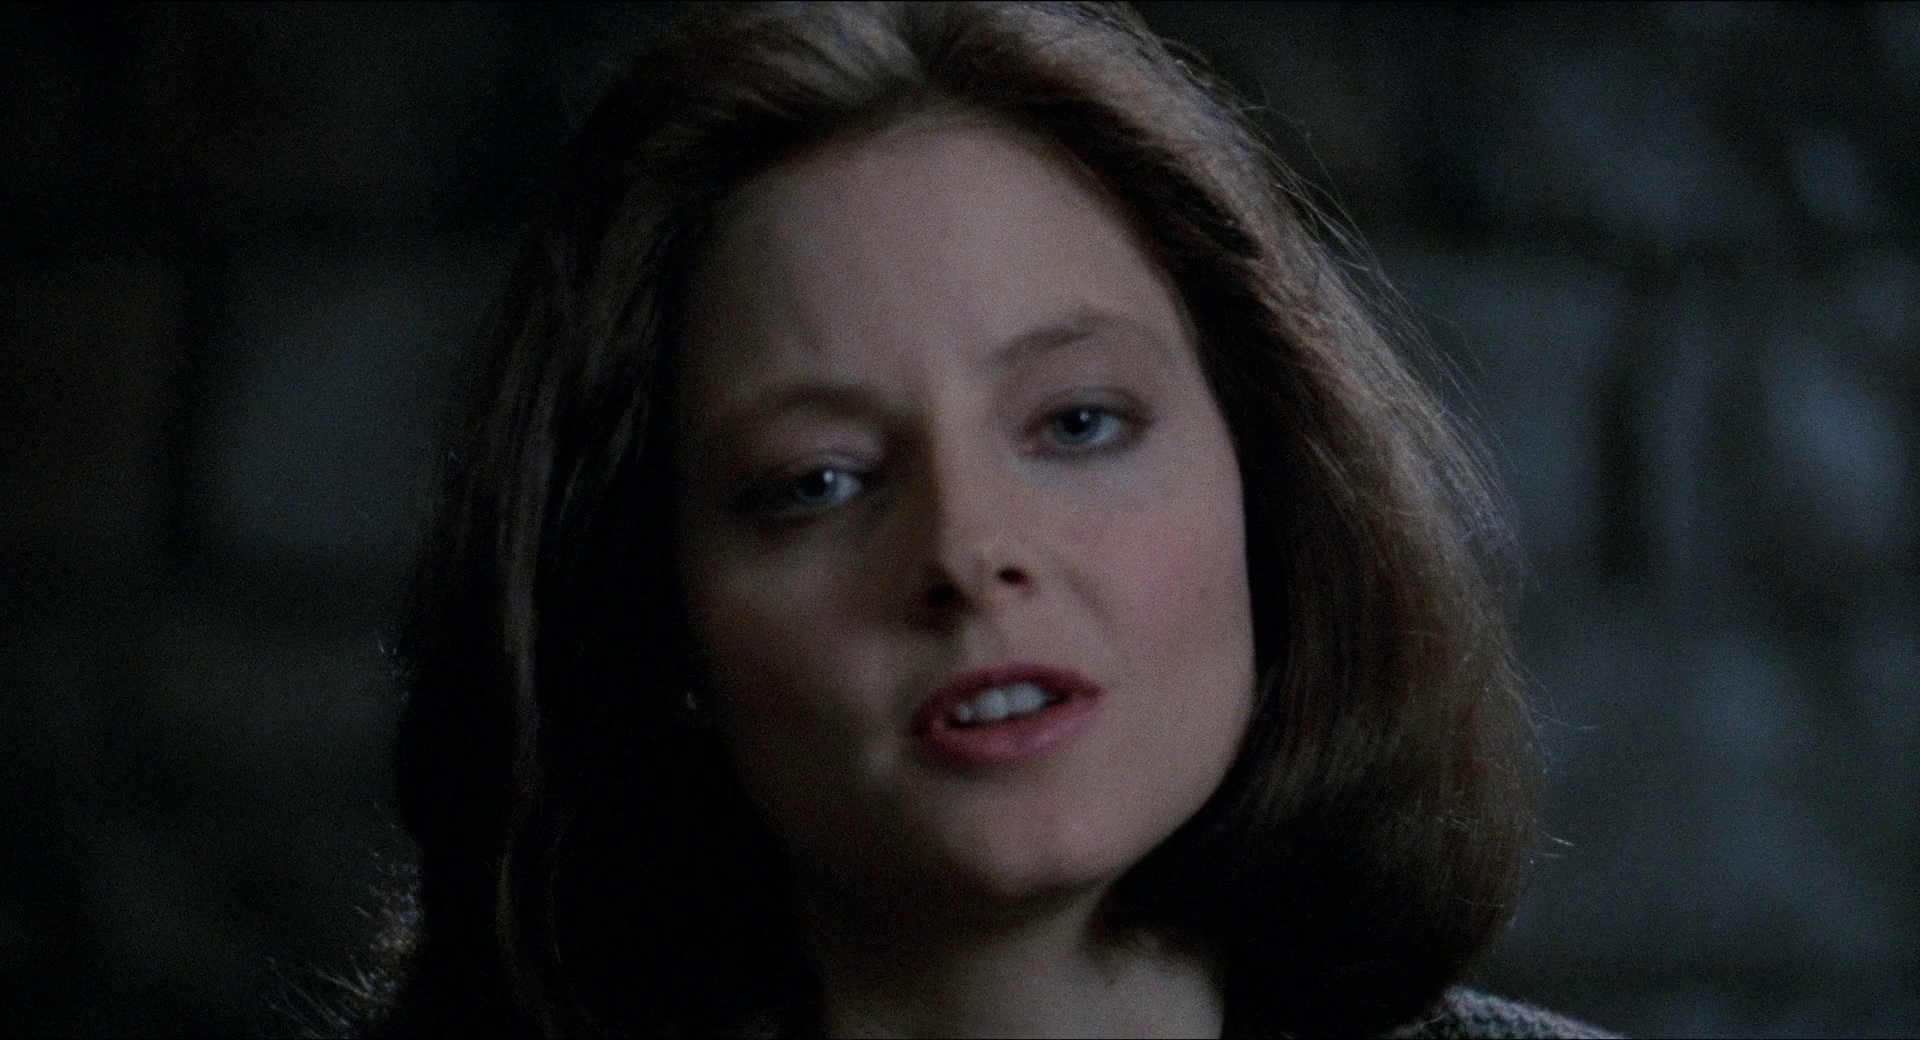 The.Silence.of.the.Lambs.1991.REMASTERED.1080p.BluRay.x264-S